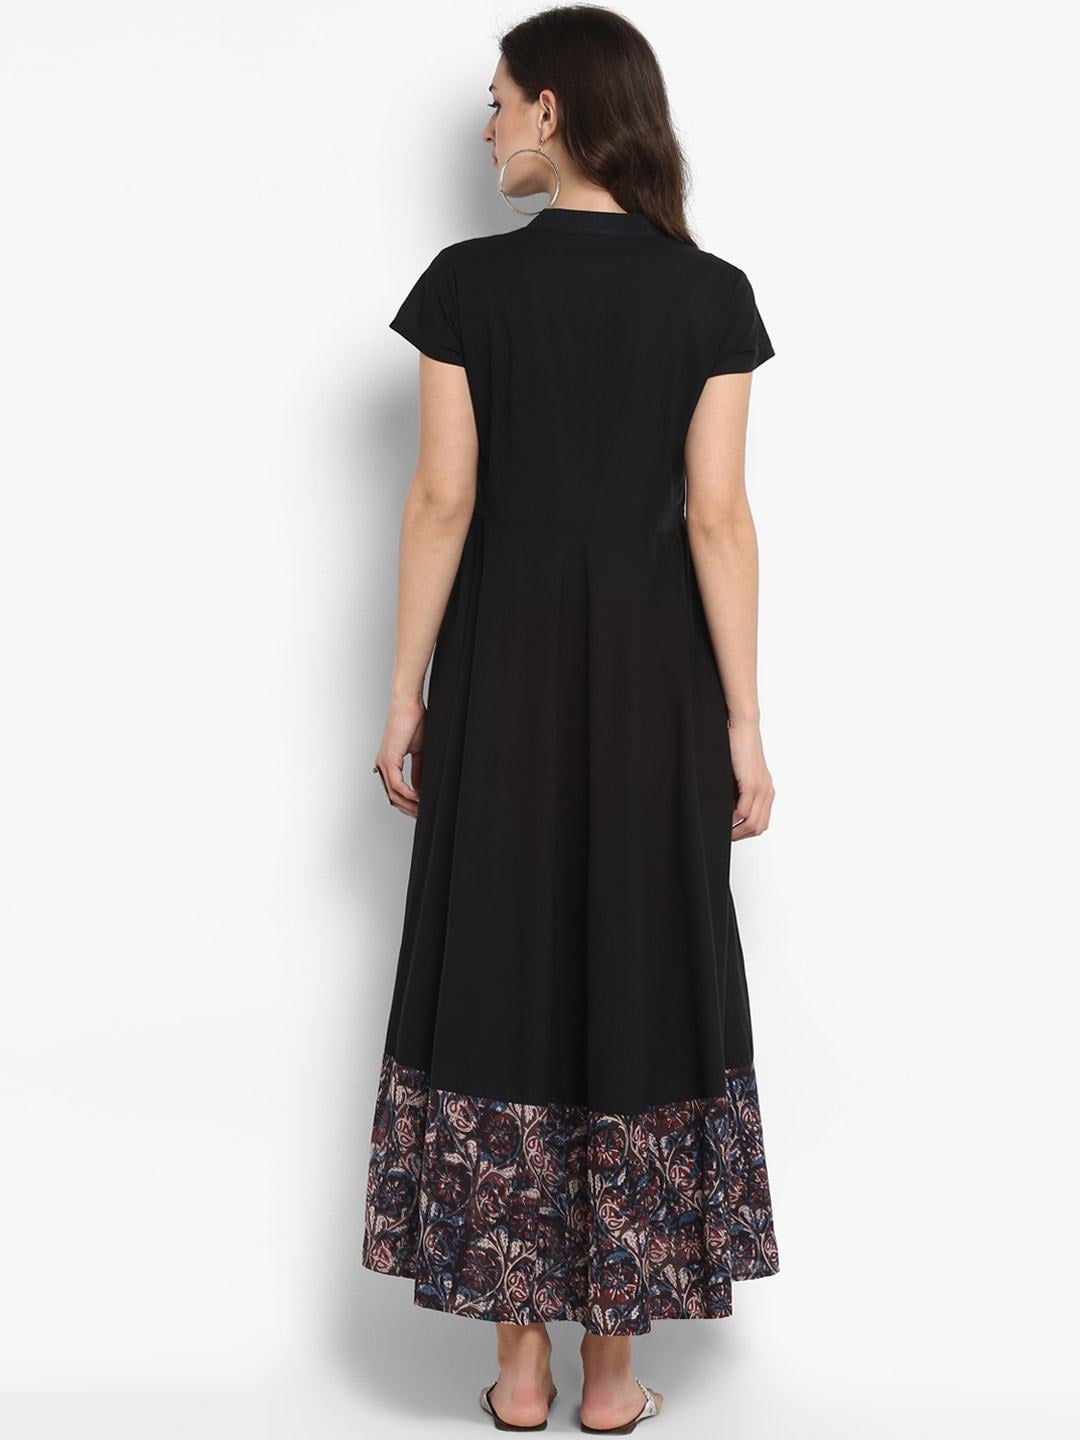 Women's Black Printed Fit and Flare Dress - Meeranshi